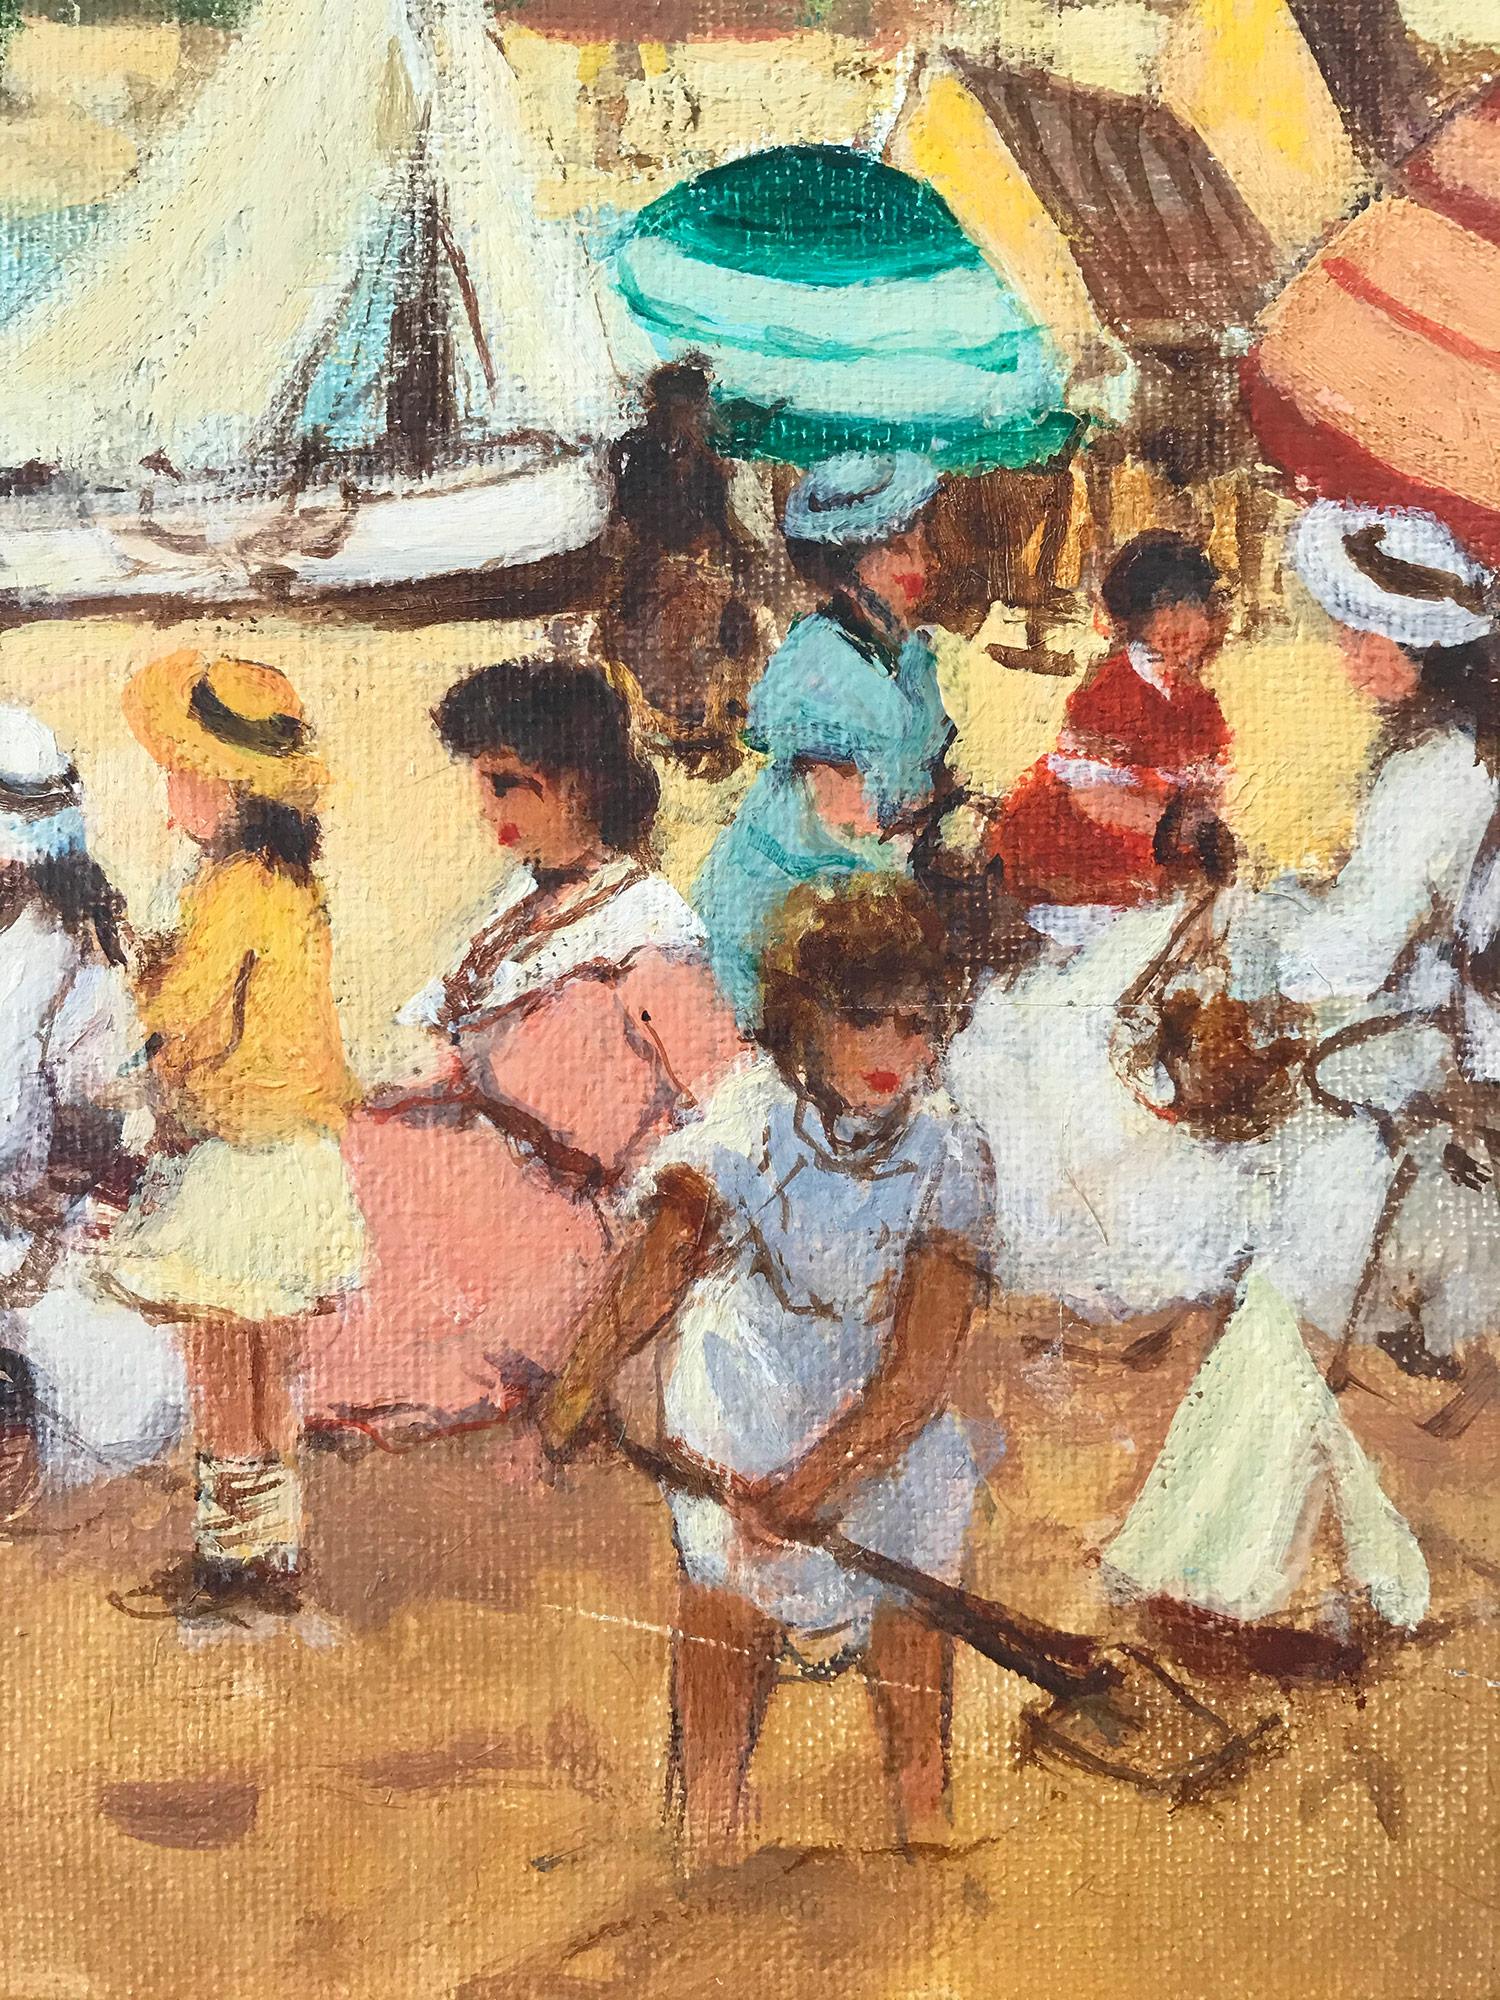 A stunning oil painting scene depicting figures by the beach in a sunny day at Nice, France done in the 20th Century. The vibrant colors and impressionistic brushwork is done with both detail and precision. The people are depicted on a beautiful